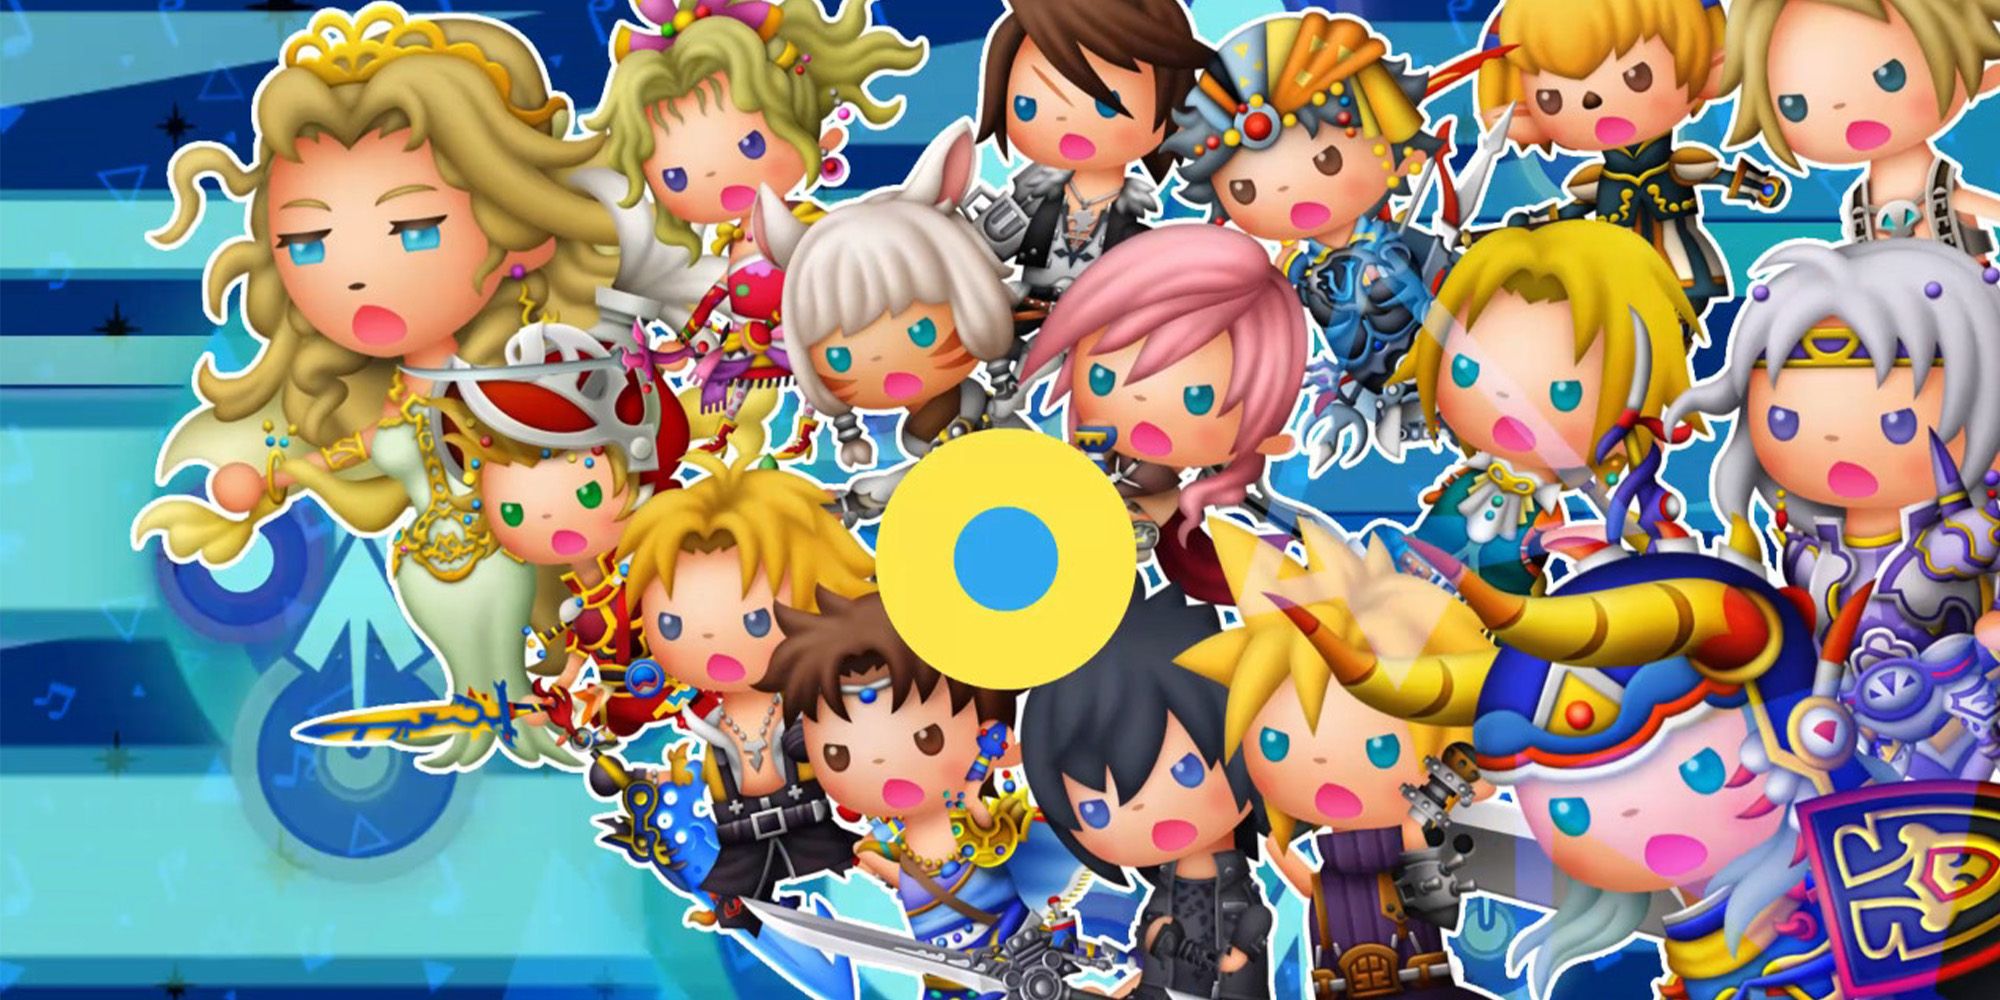 Materia leads Final Fantasy's many protagonists in battle in Theatrhythm: Final Bar Line.